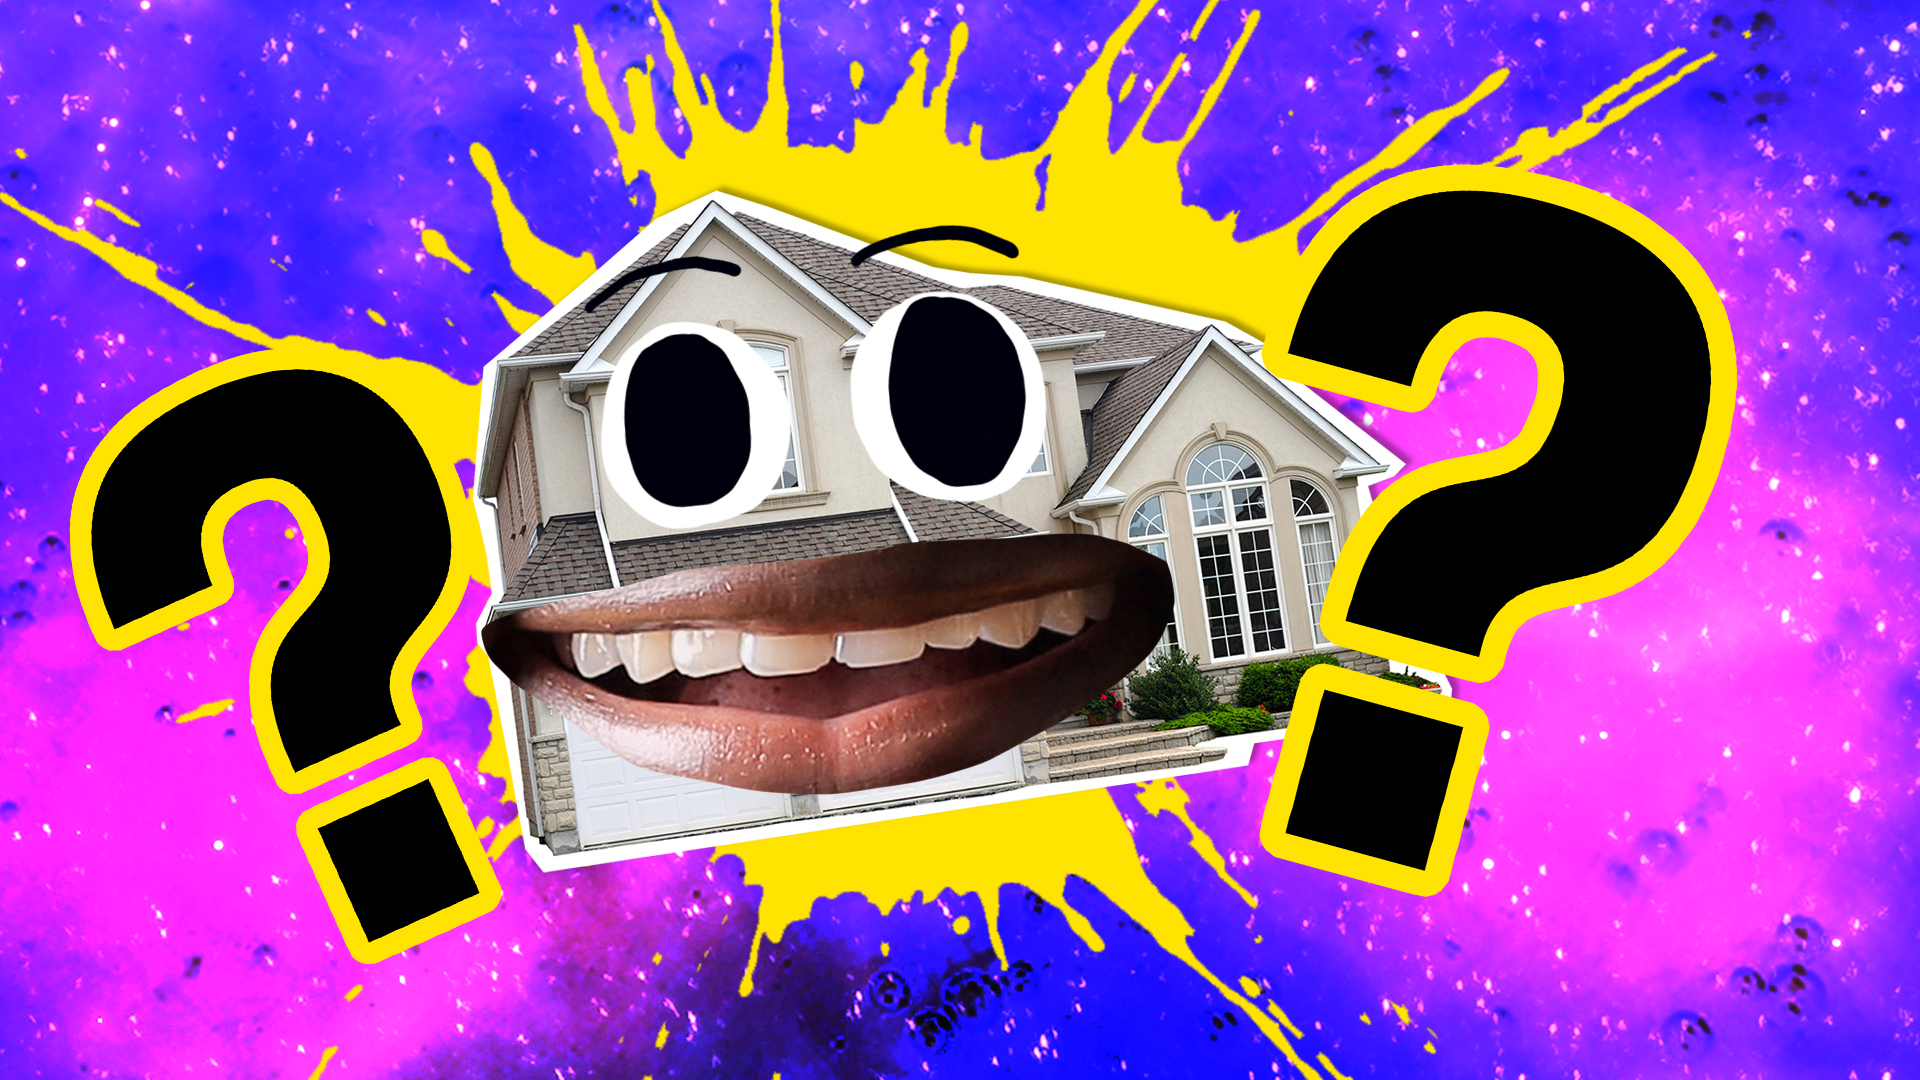 A happy house with a big smile